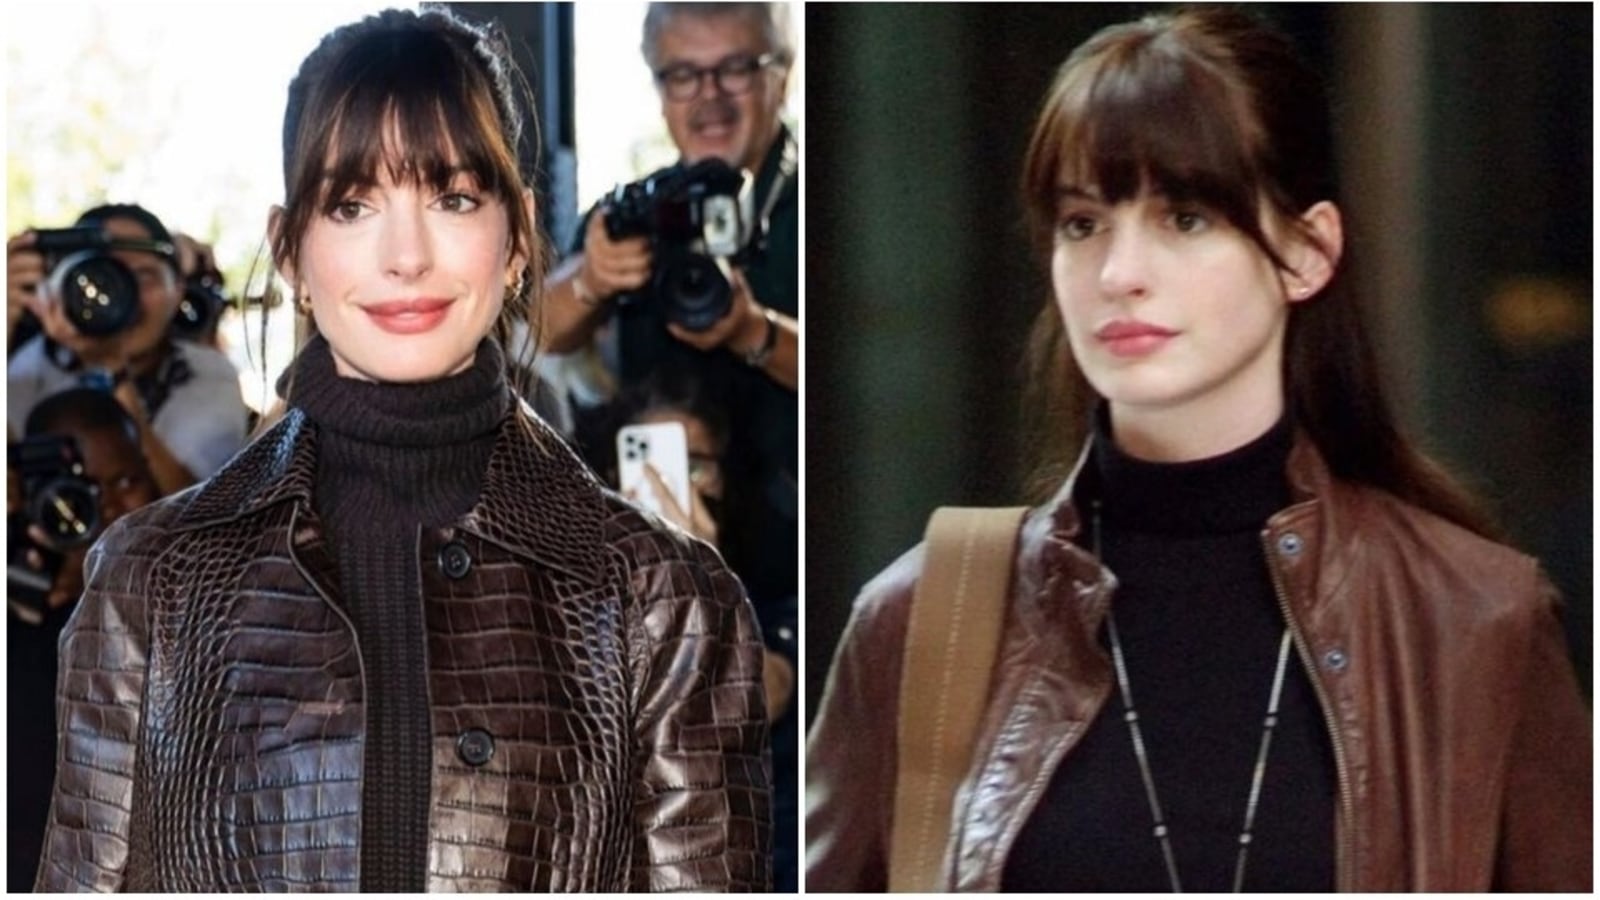 Anne Hathaway recreates Devil Wears Prada outfit at NYFW 2022